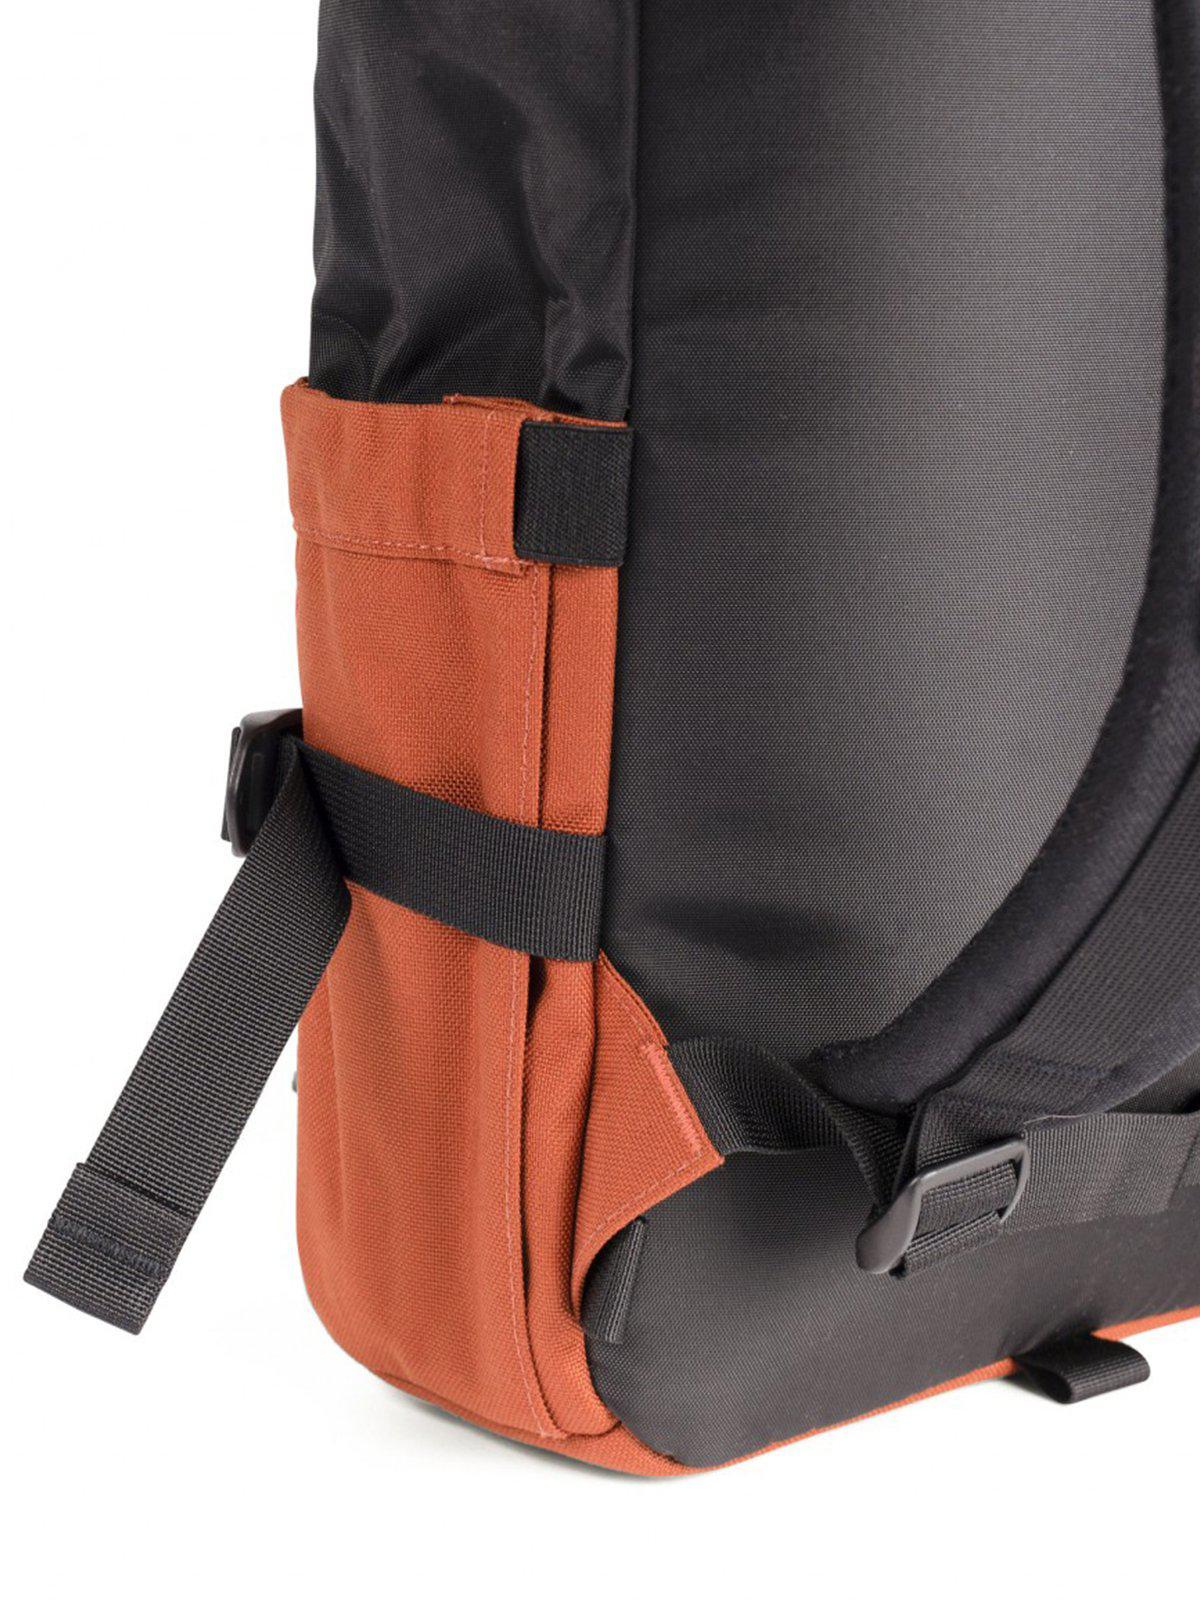 Topo Designs Rover Pack Navy